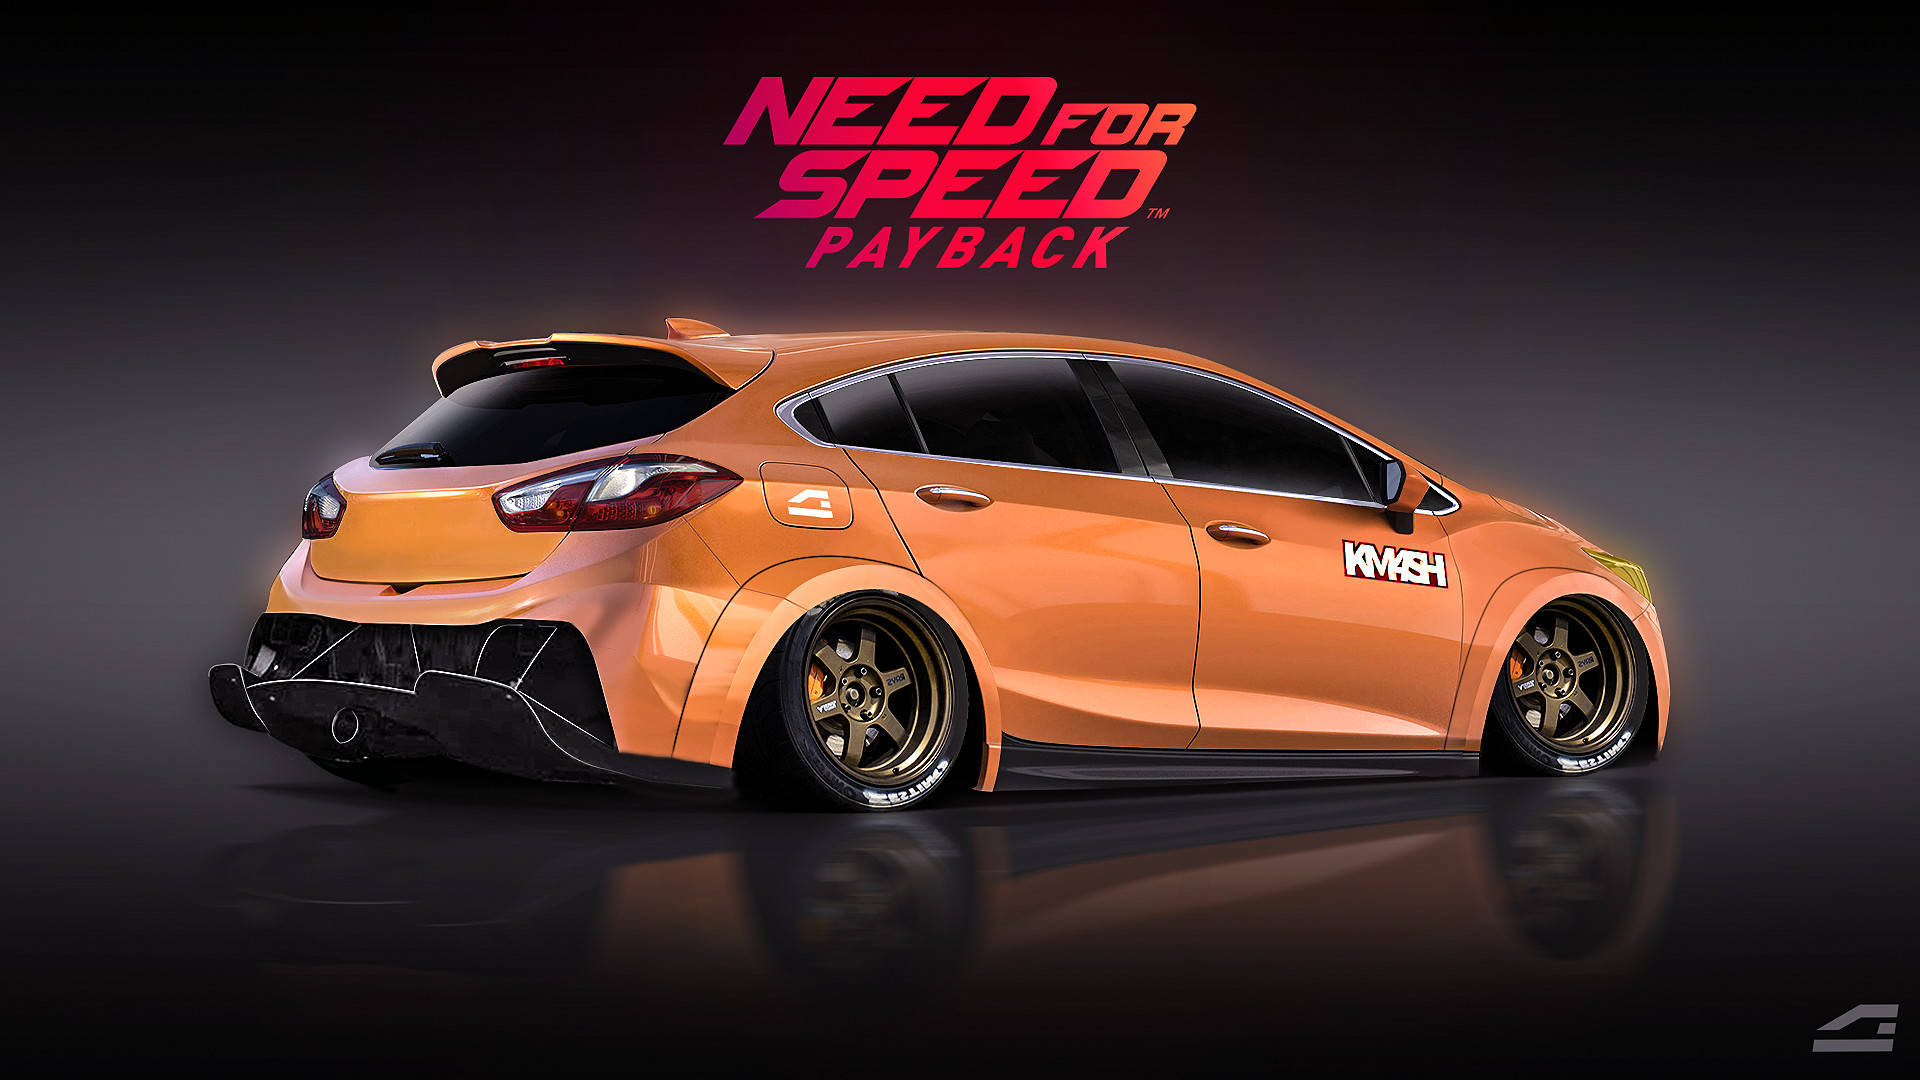 Need For Speed Payback Chevrolet Cruze